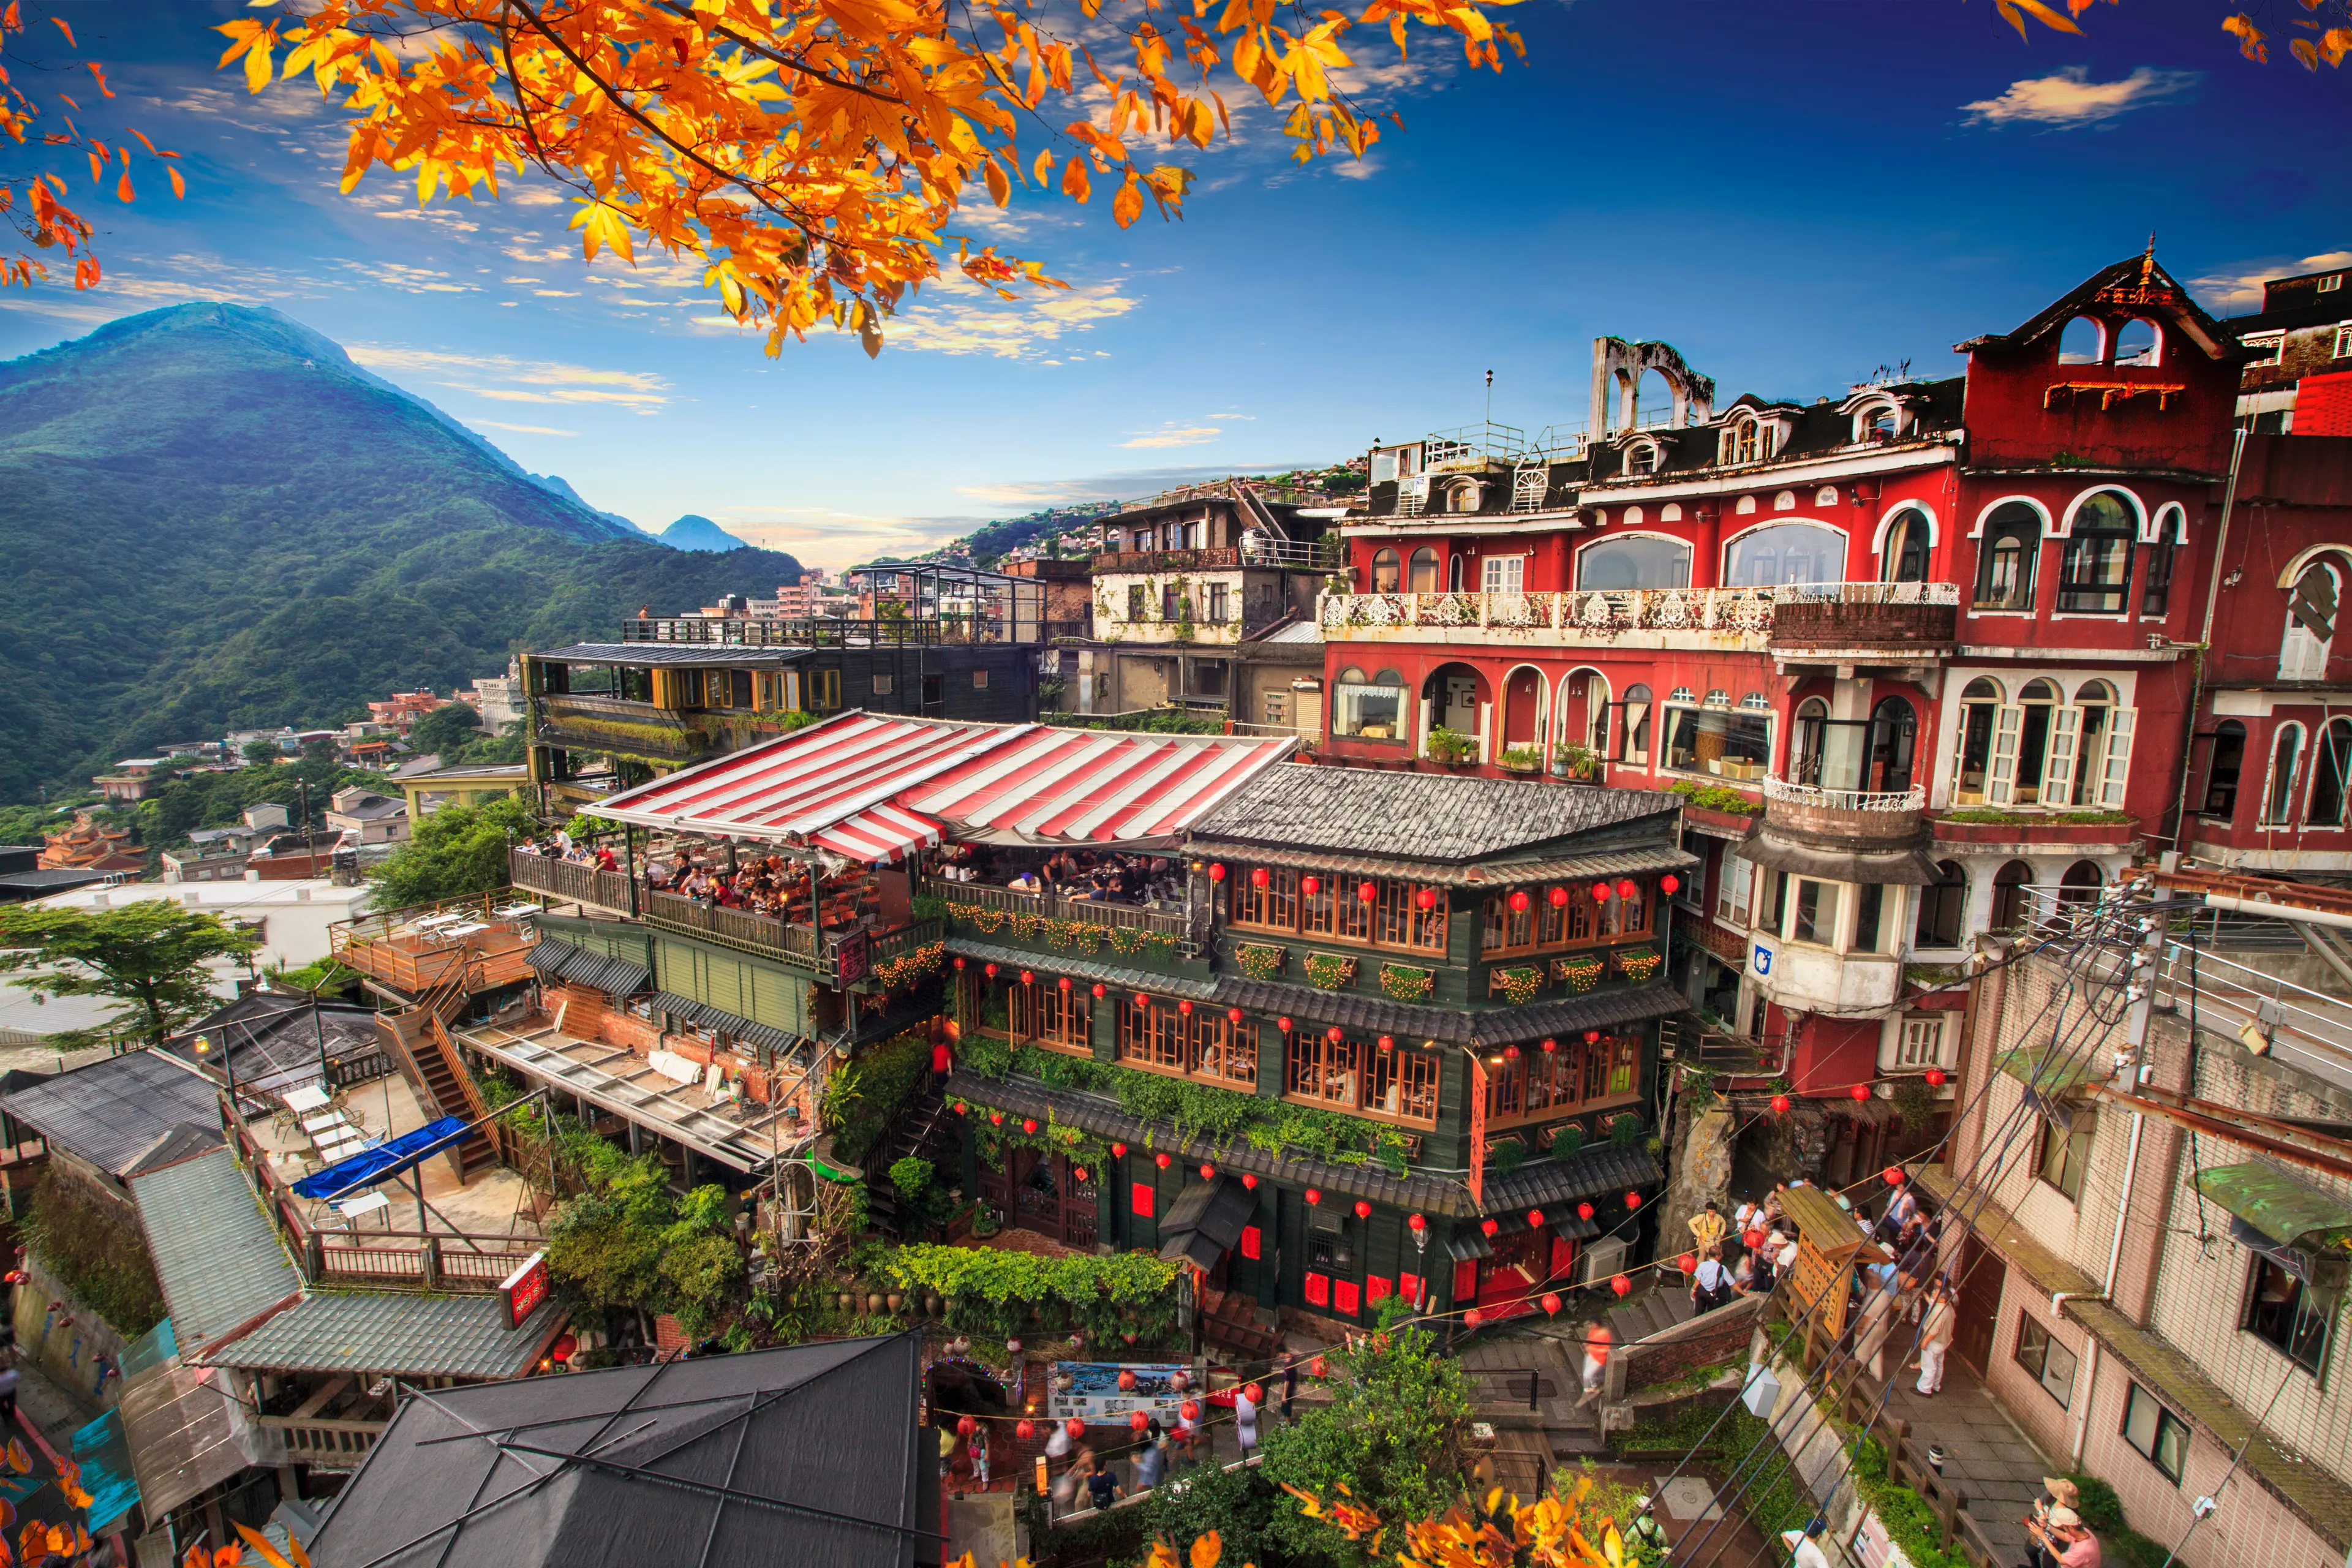 View of the Jiufen area